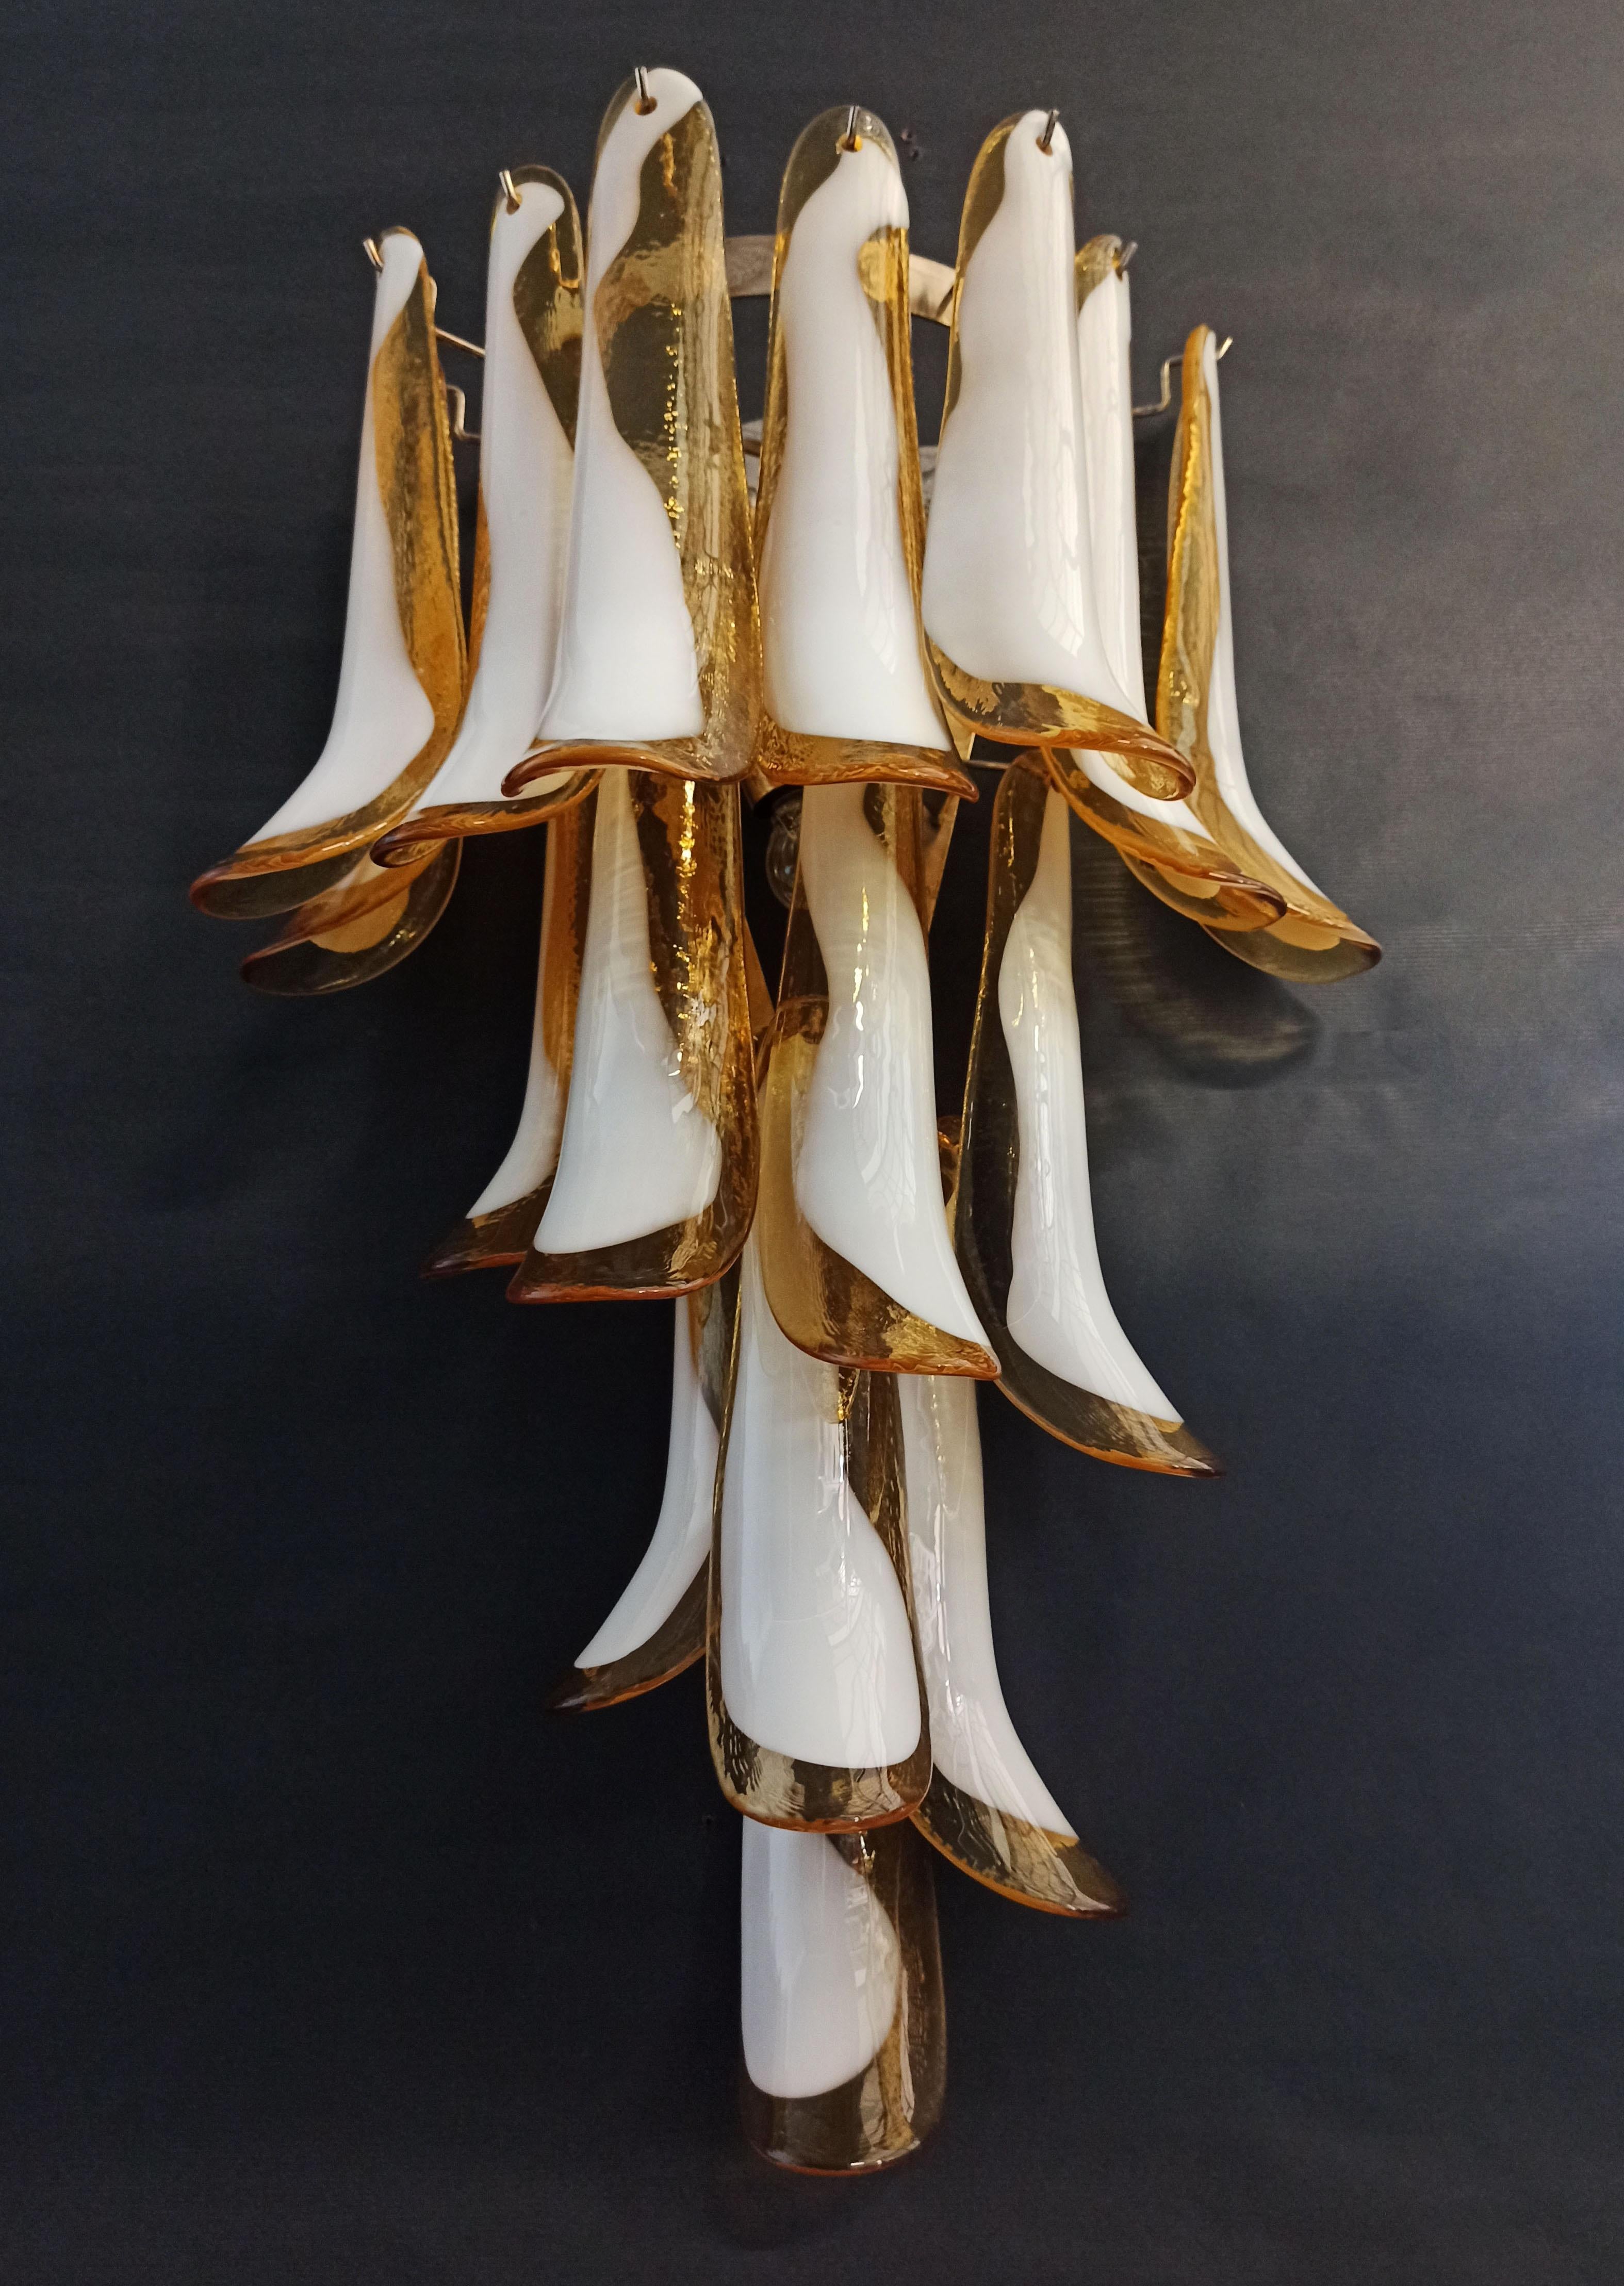 Pair of vintage Italian Murano wall sconces. Wall lights have 16 caramel and white “lattimo” glasses (for each applique) in a nickel-plated metal frame. Decorative object of great importance.
Period: late XX century
Dimensions: 27.90 inches (72